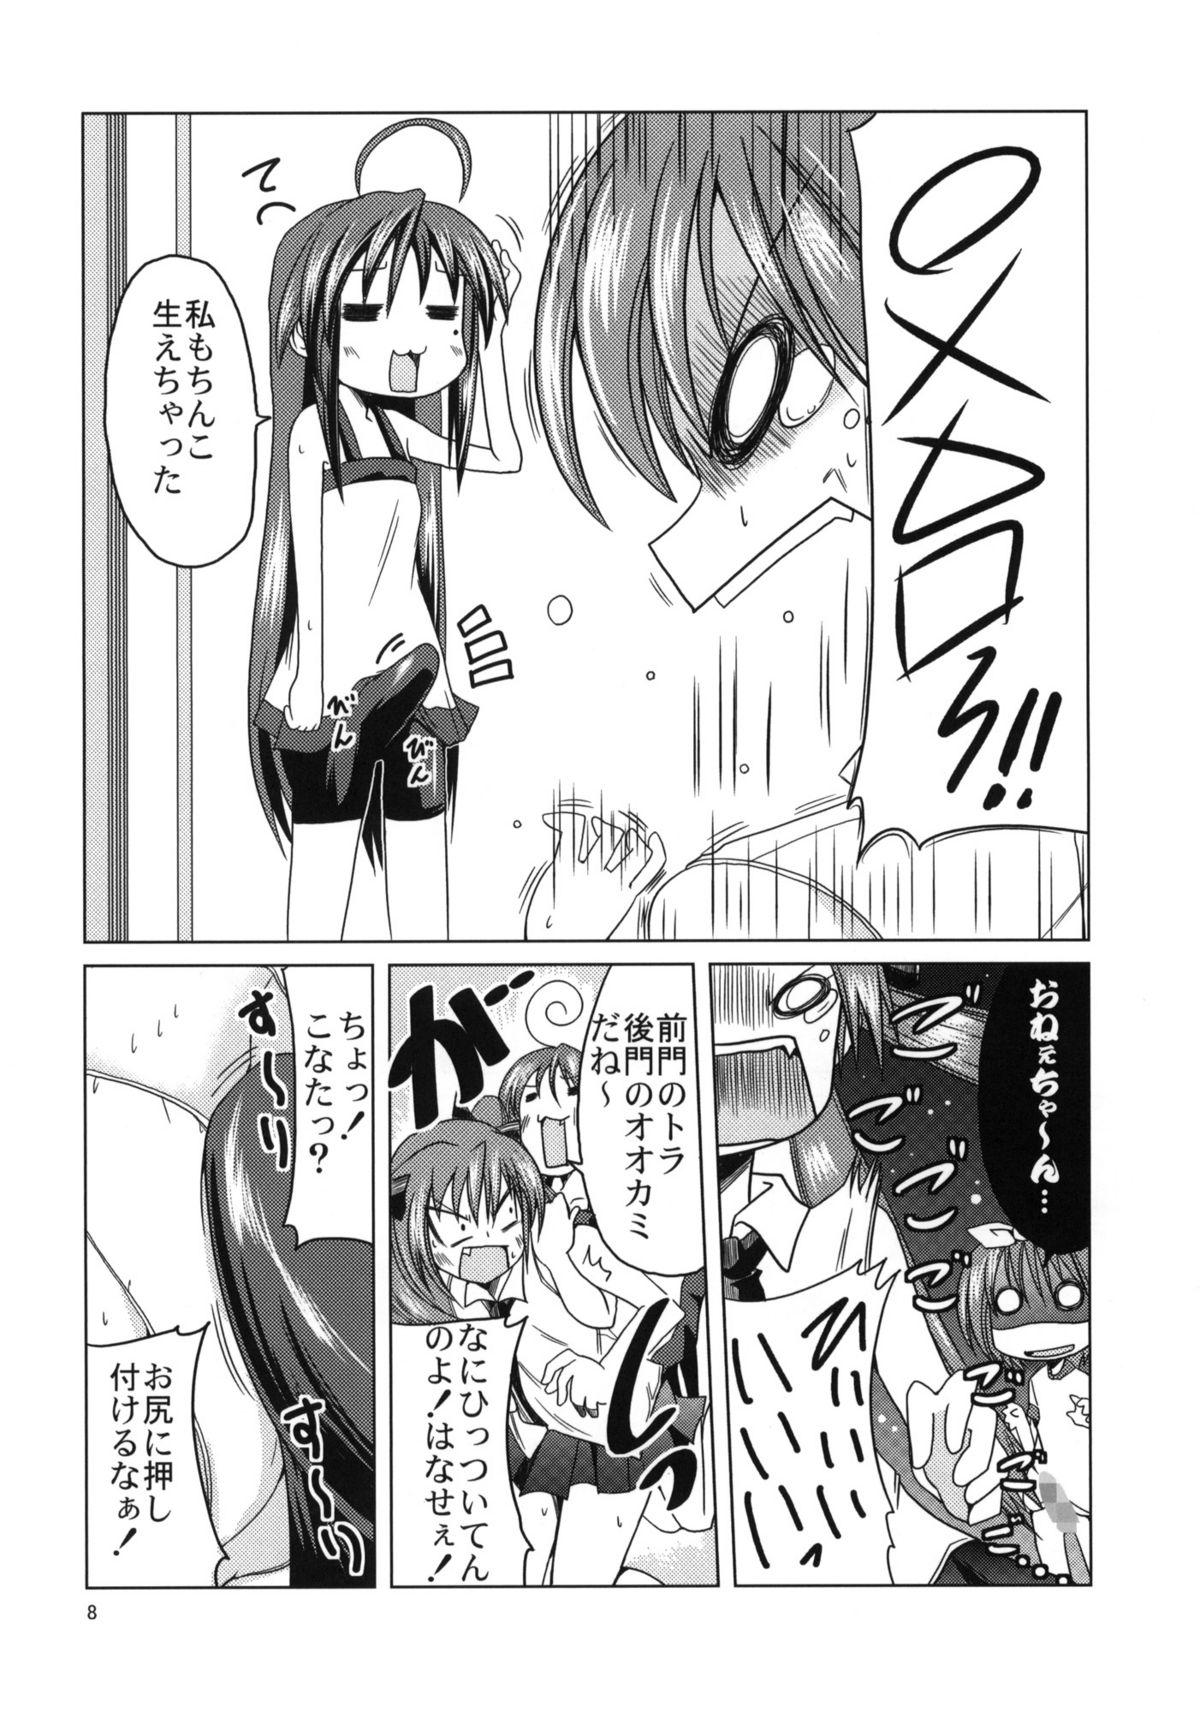 Panties Lucky Ura Channel - Lucky star Pickup - Page 7